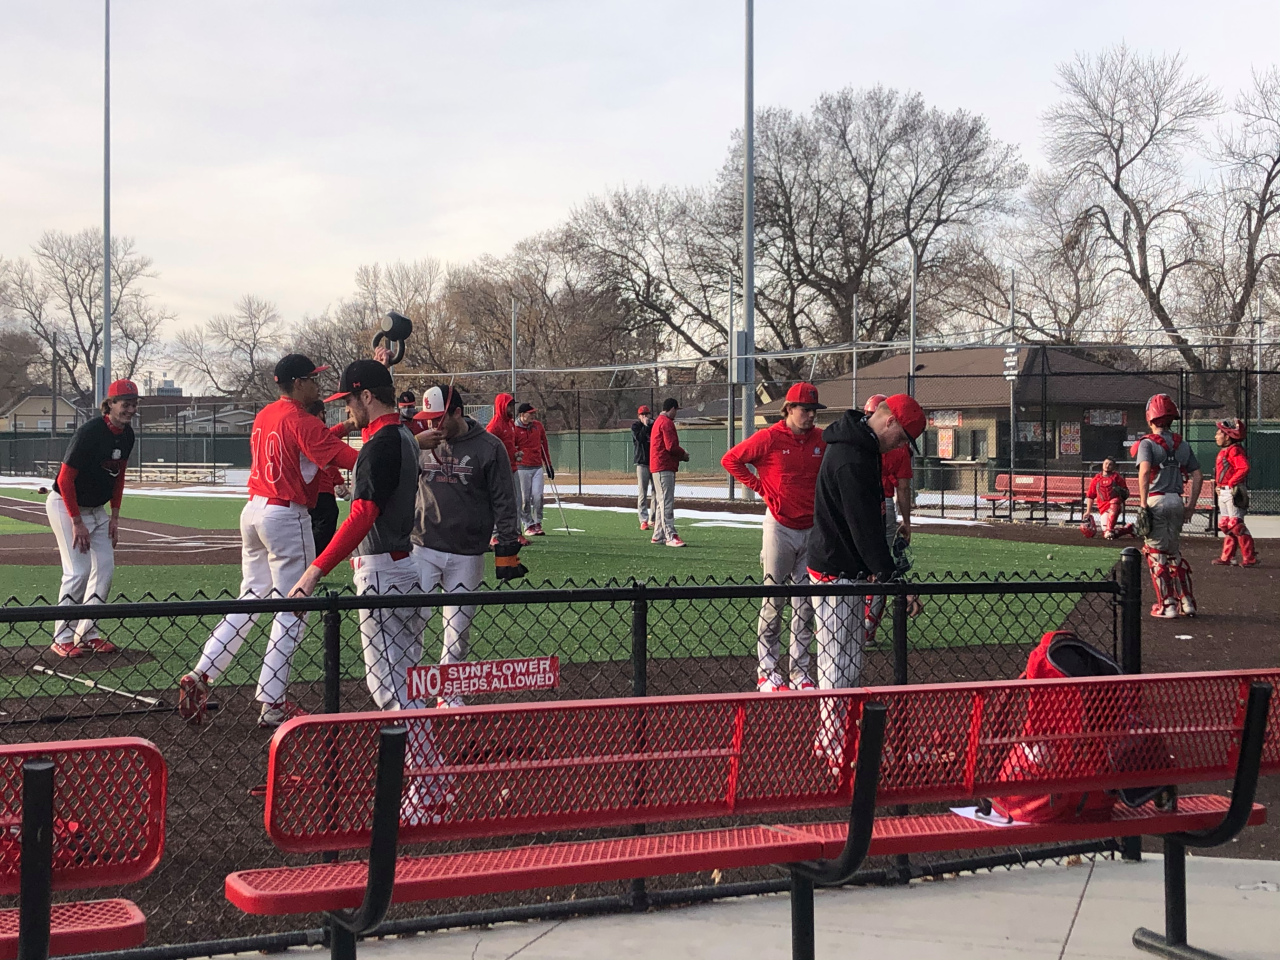 Minot State University’s baseball team out on the diamond a little early — thanks to warm weather